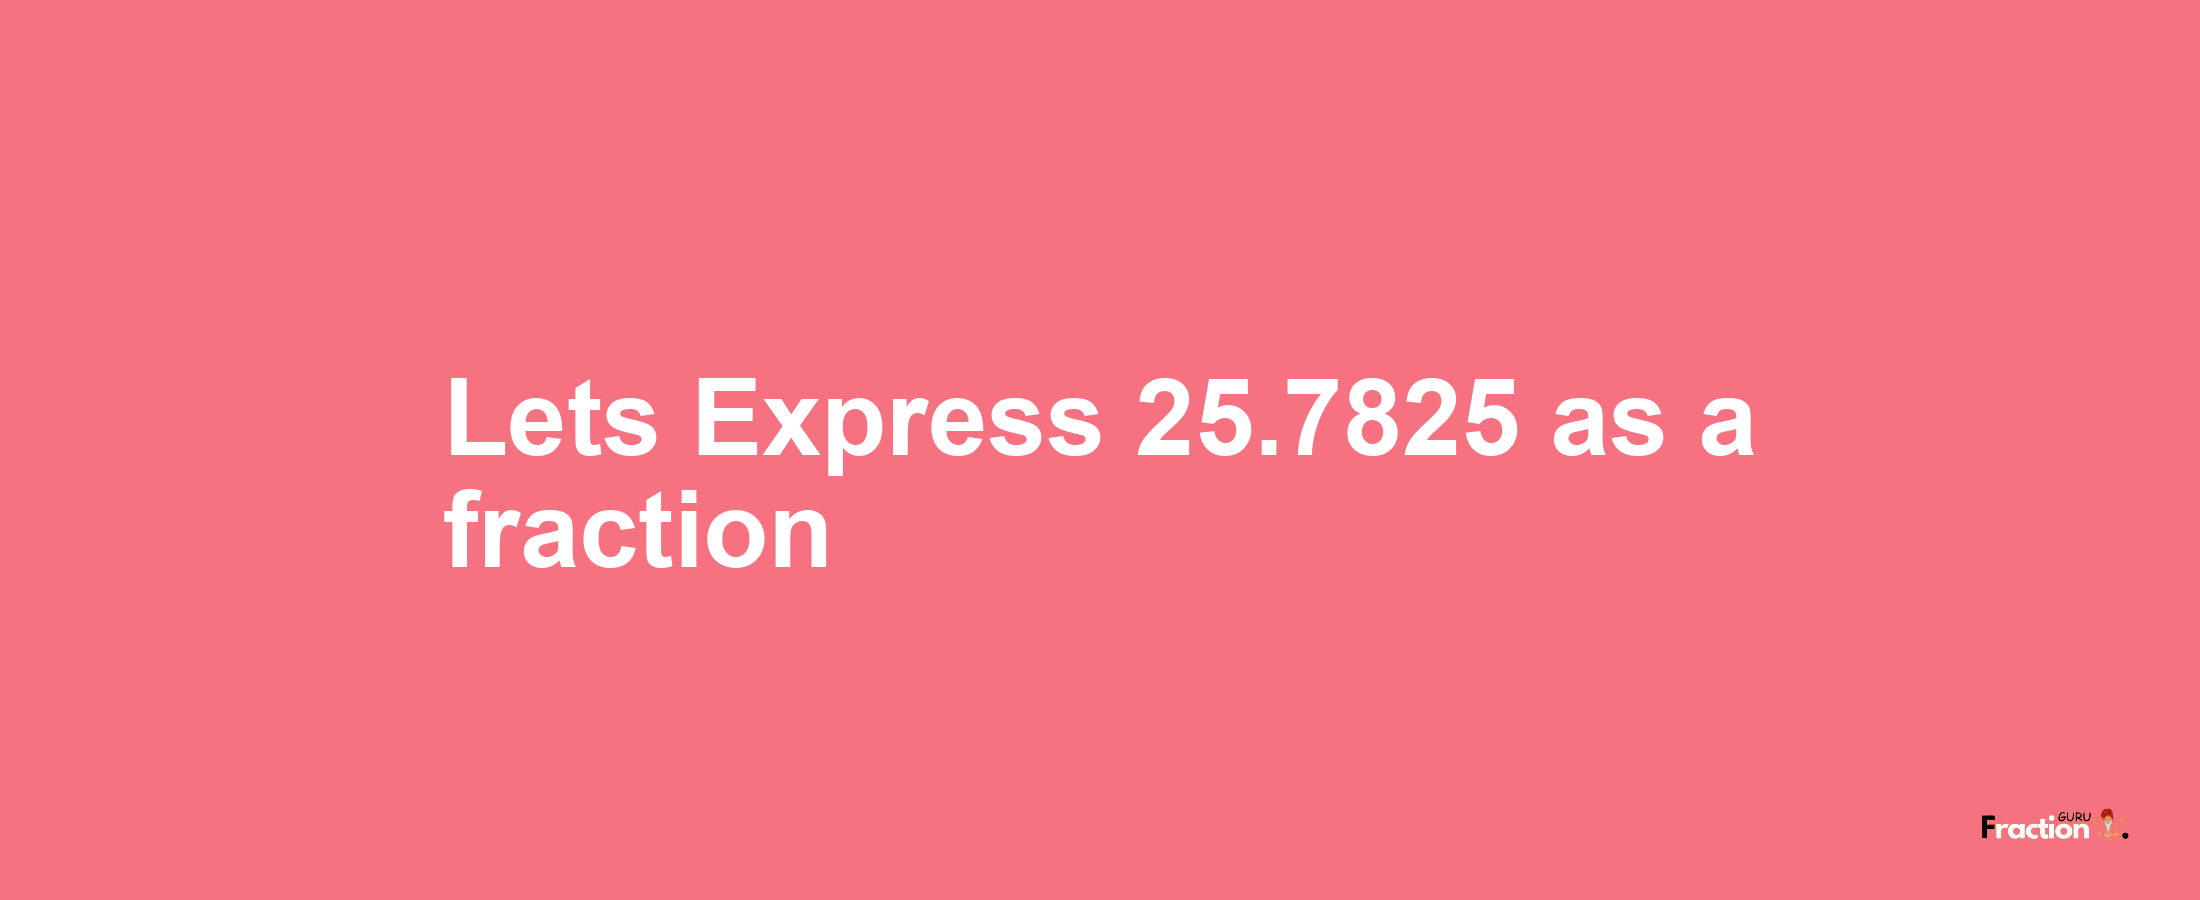 Lets Express 25.7825 as afraction